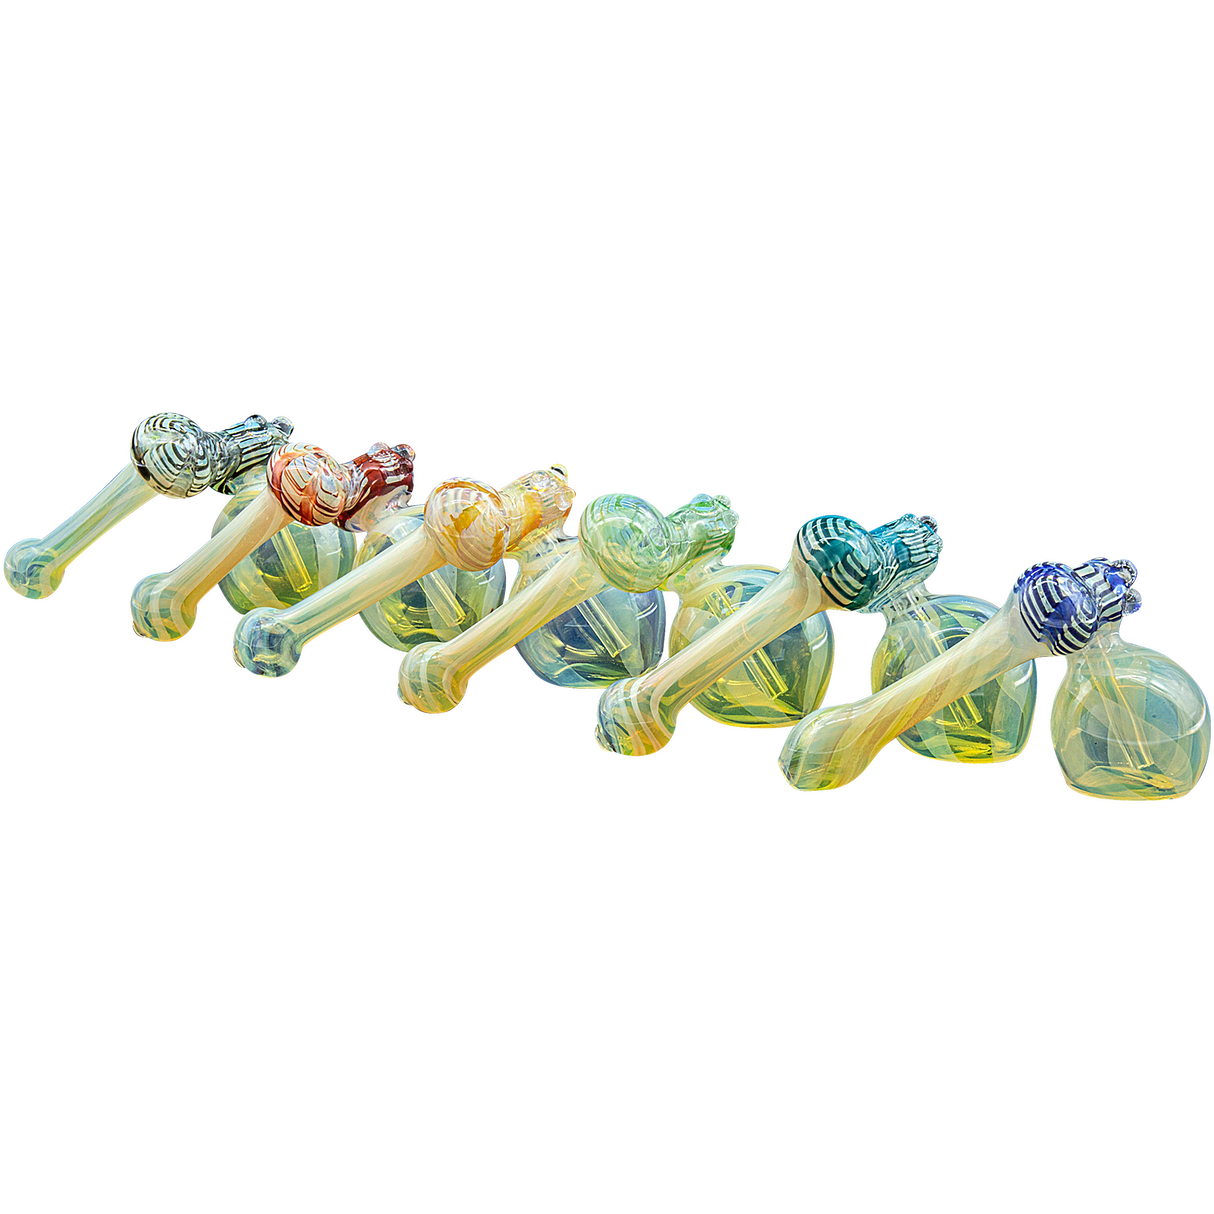 LA Pipes "Raked Sidecar" Fumed Bubblers in Assorted Colors, Angled Side View